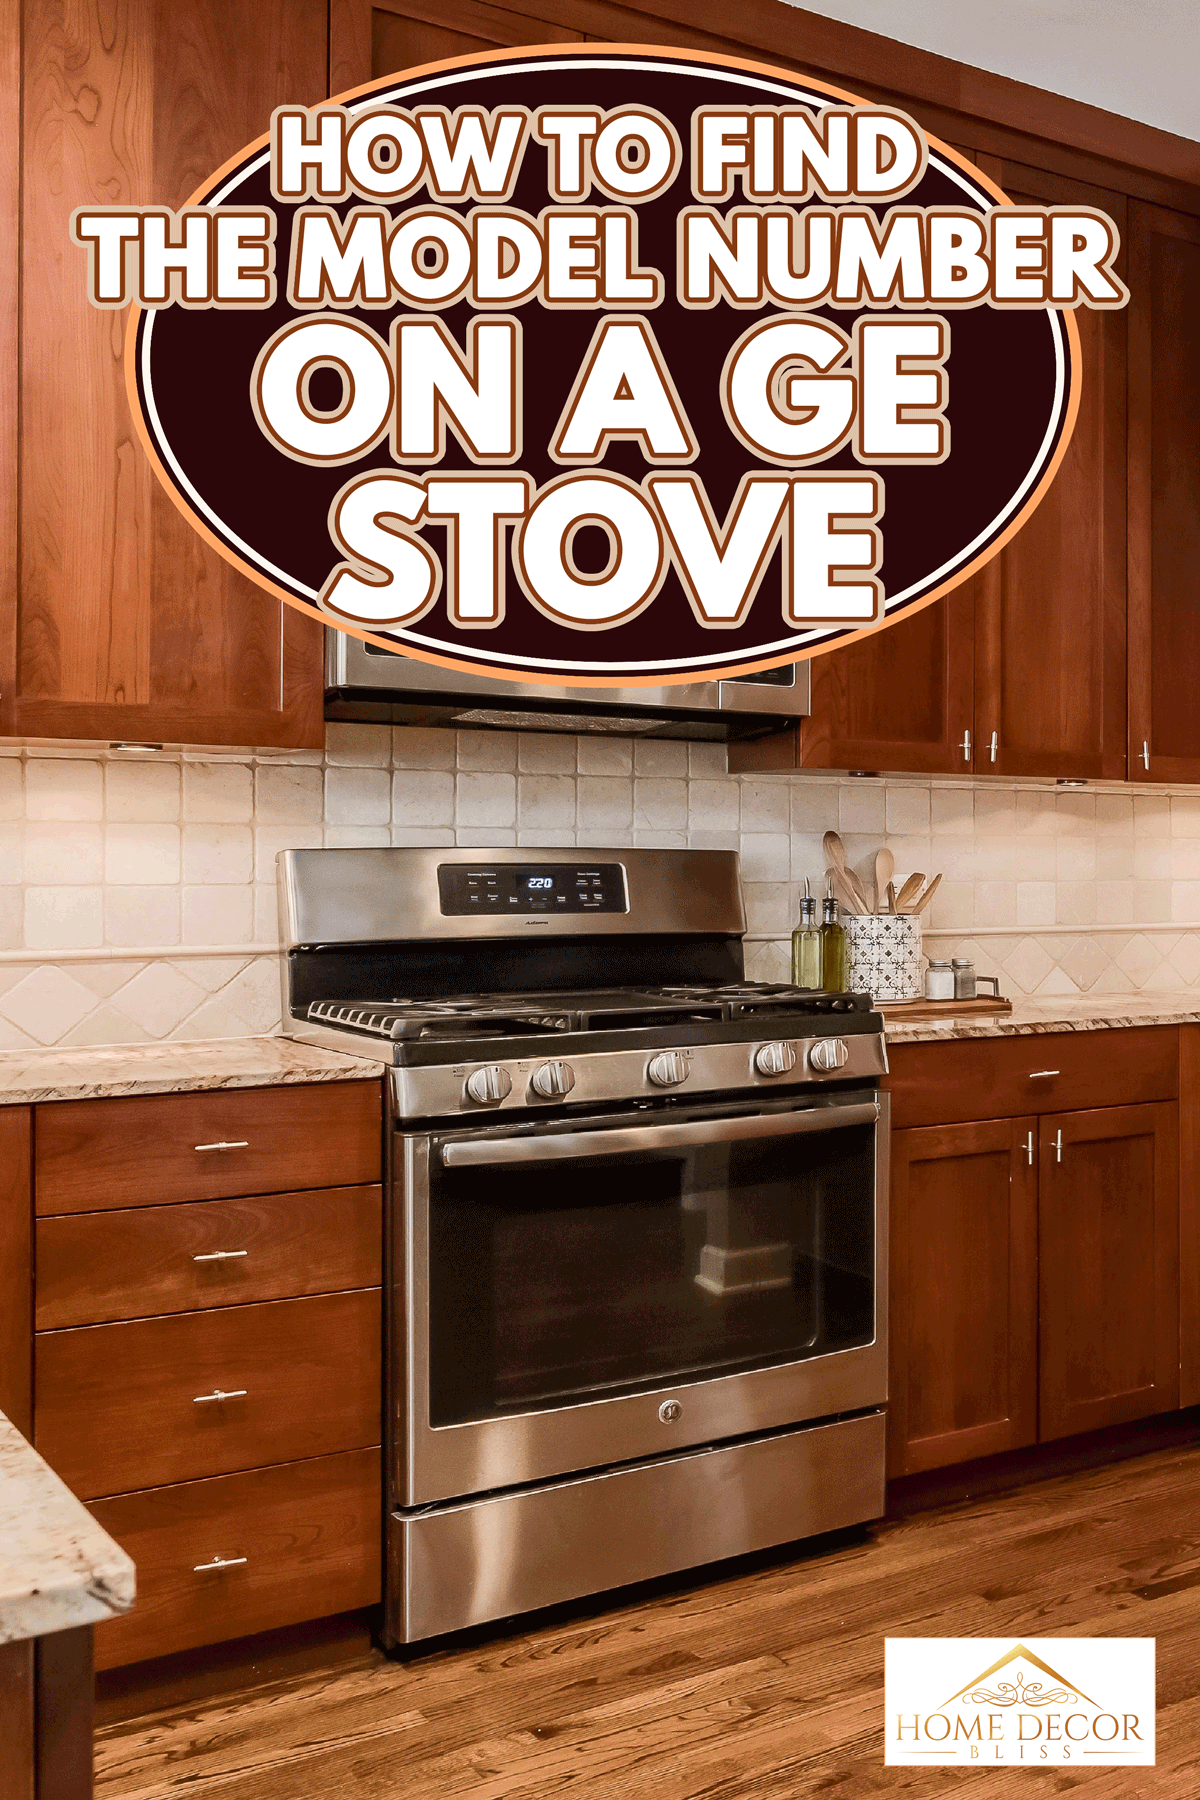 Luxurious kitchen with dark wood cabinets and GE appliances, How To Find The Model Number On A GE Stove